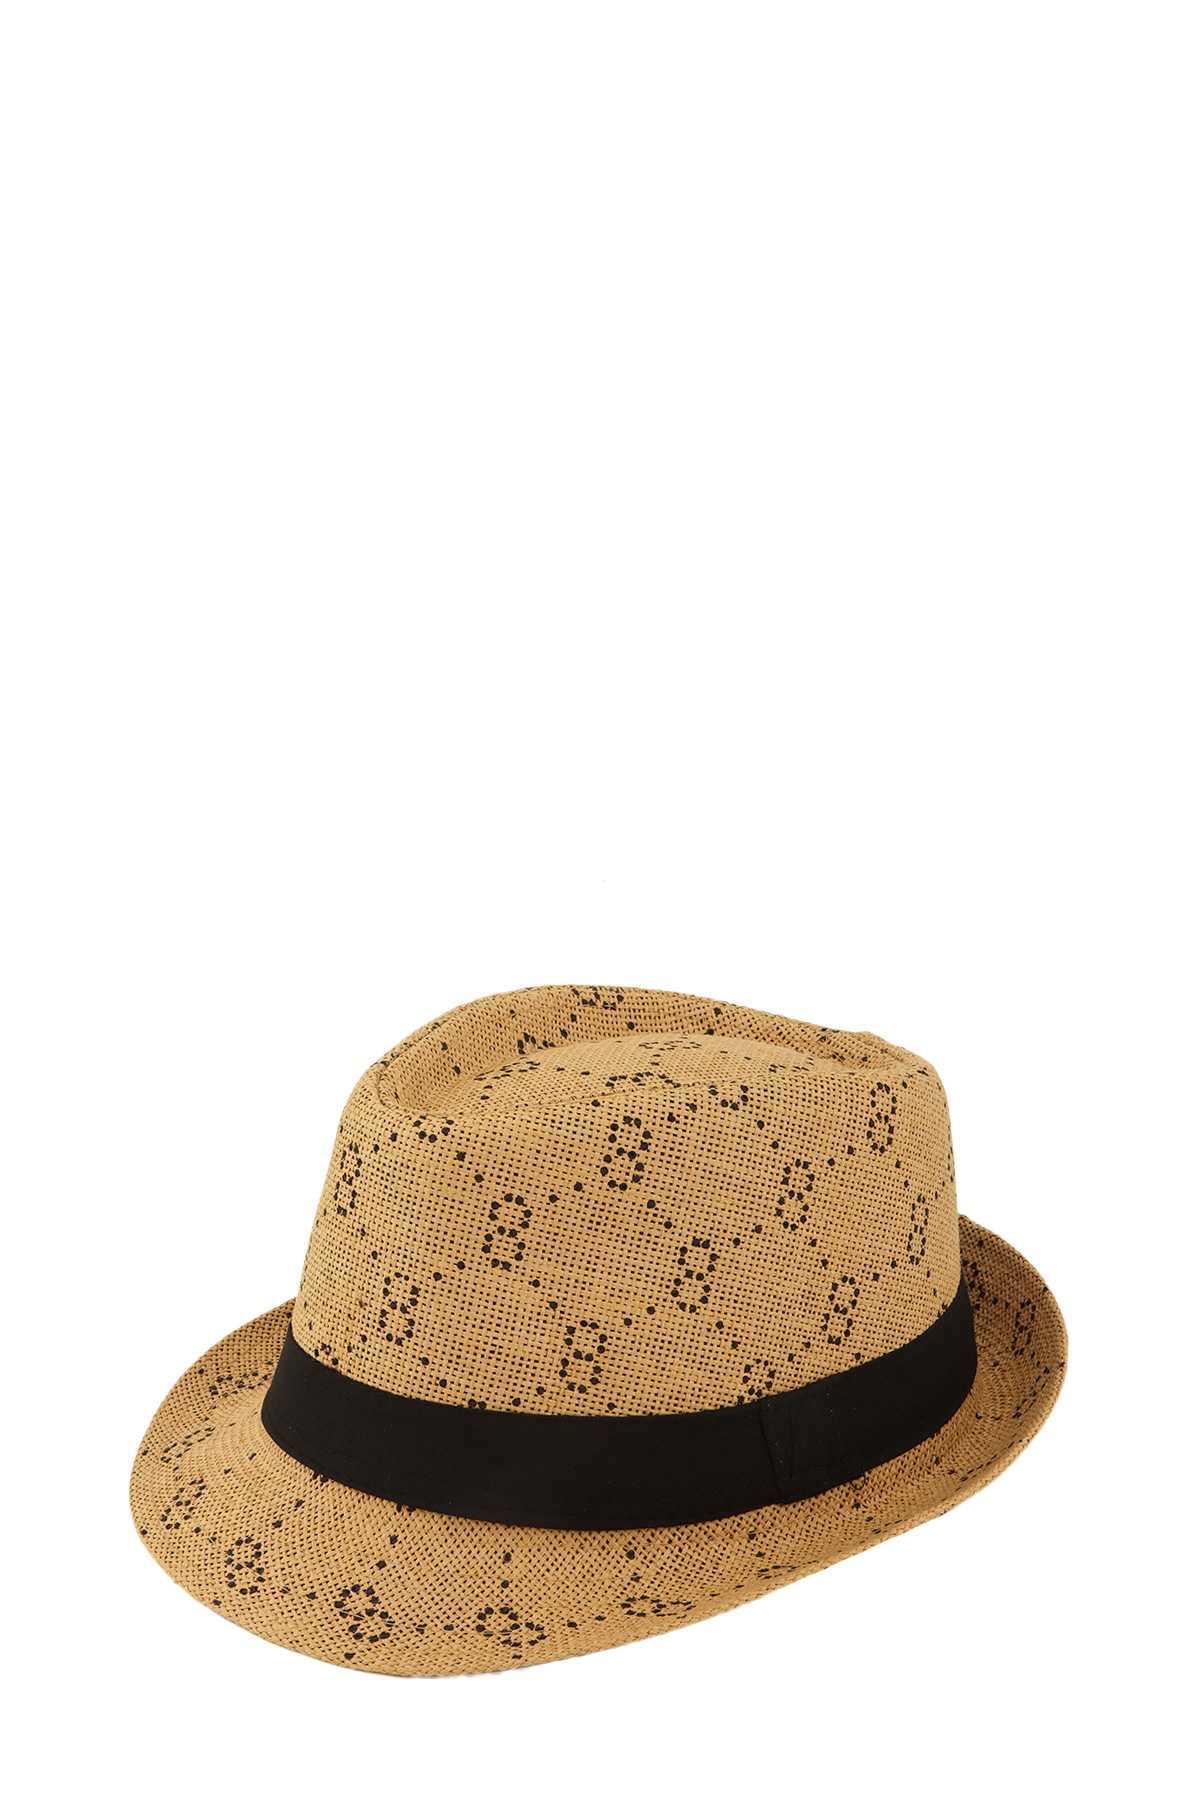 Double O Fedora and Black Band Straw Hat